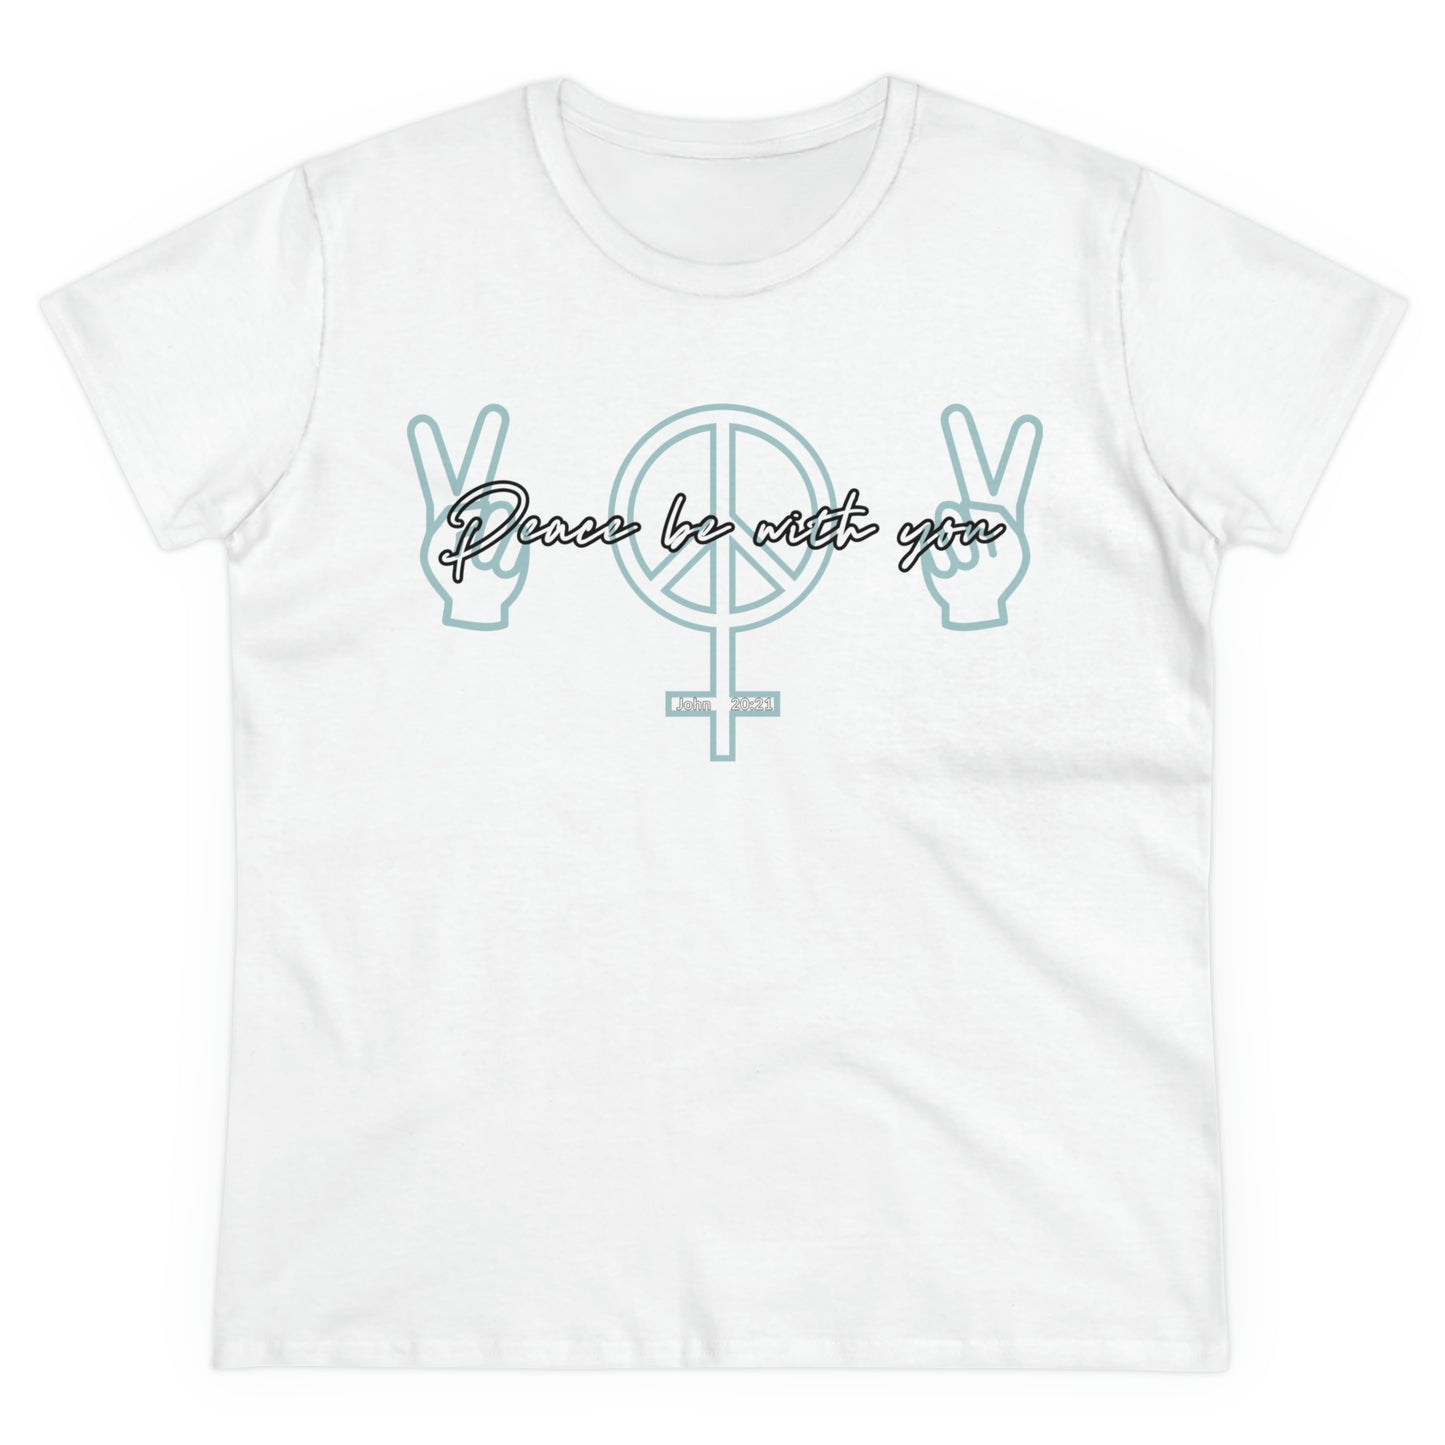 Ladies Bible Verse Shirt, Relaxed Fit Short Sleeve T-Shirt, Ladies Crewneck, Woman's Cotton Tee